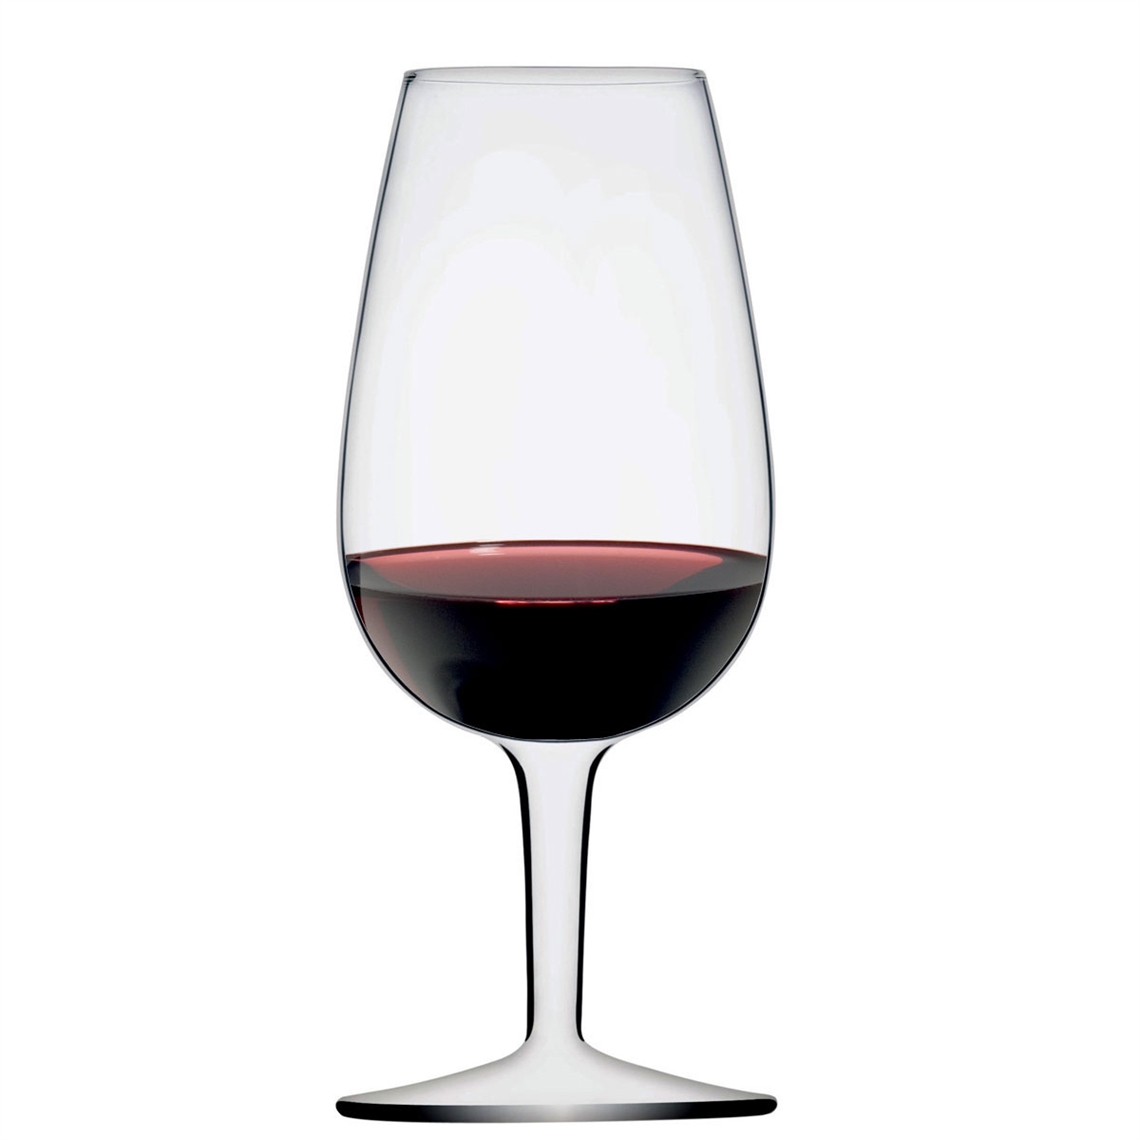 View more riedel vinum from our Wine Tasting Glasses range